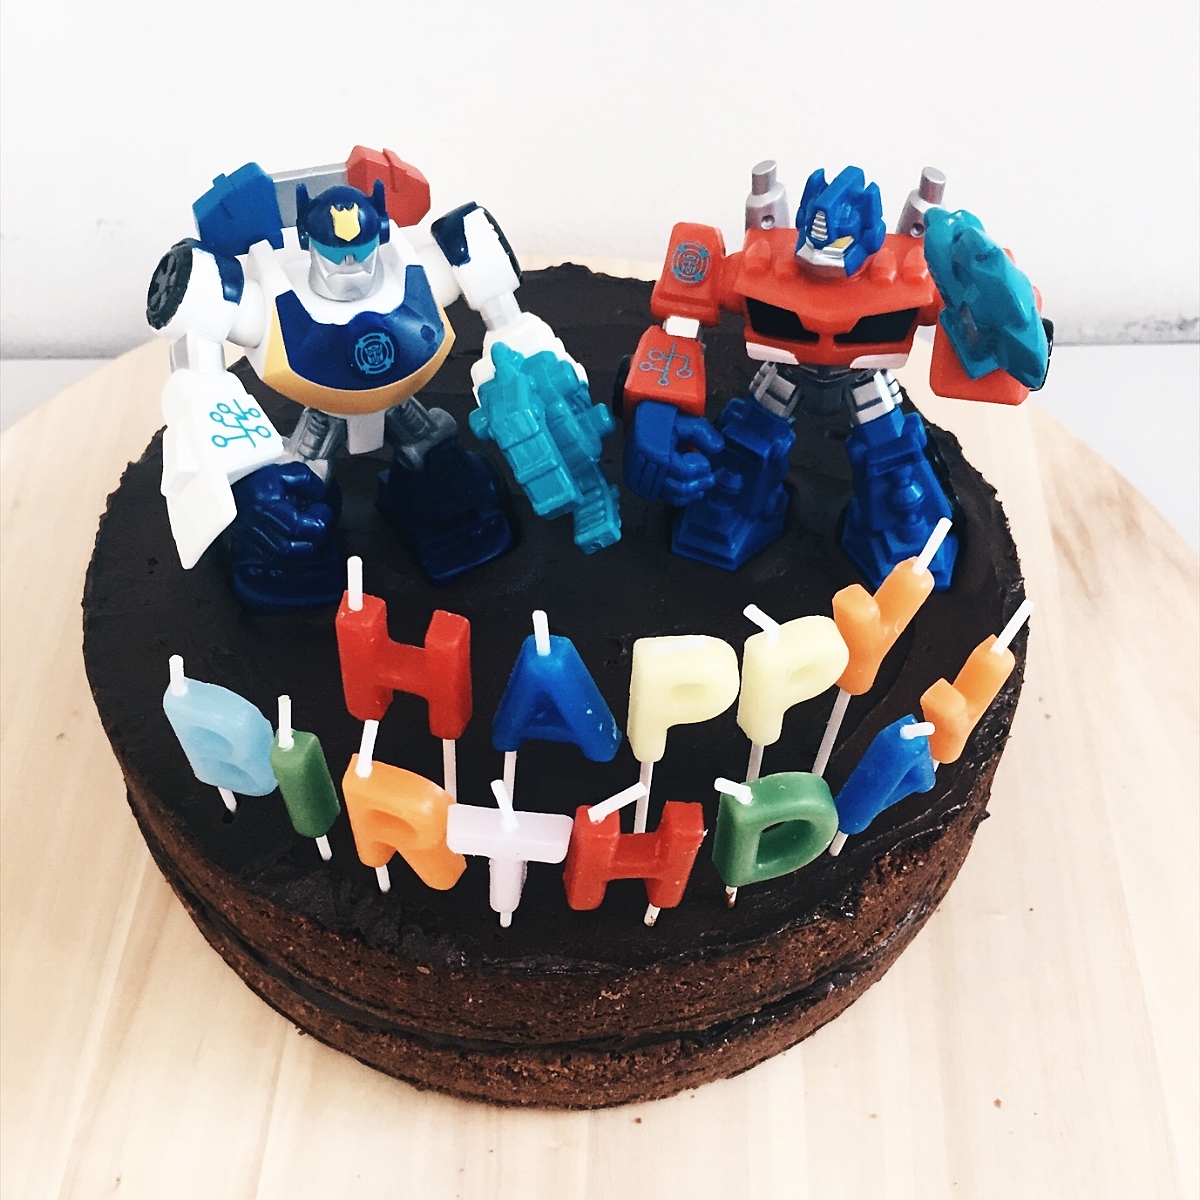 Rescuebots - Cake Affair, cakes for every occasion